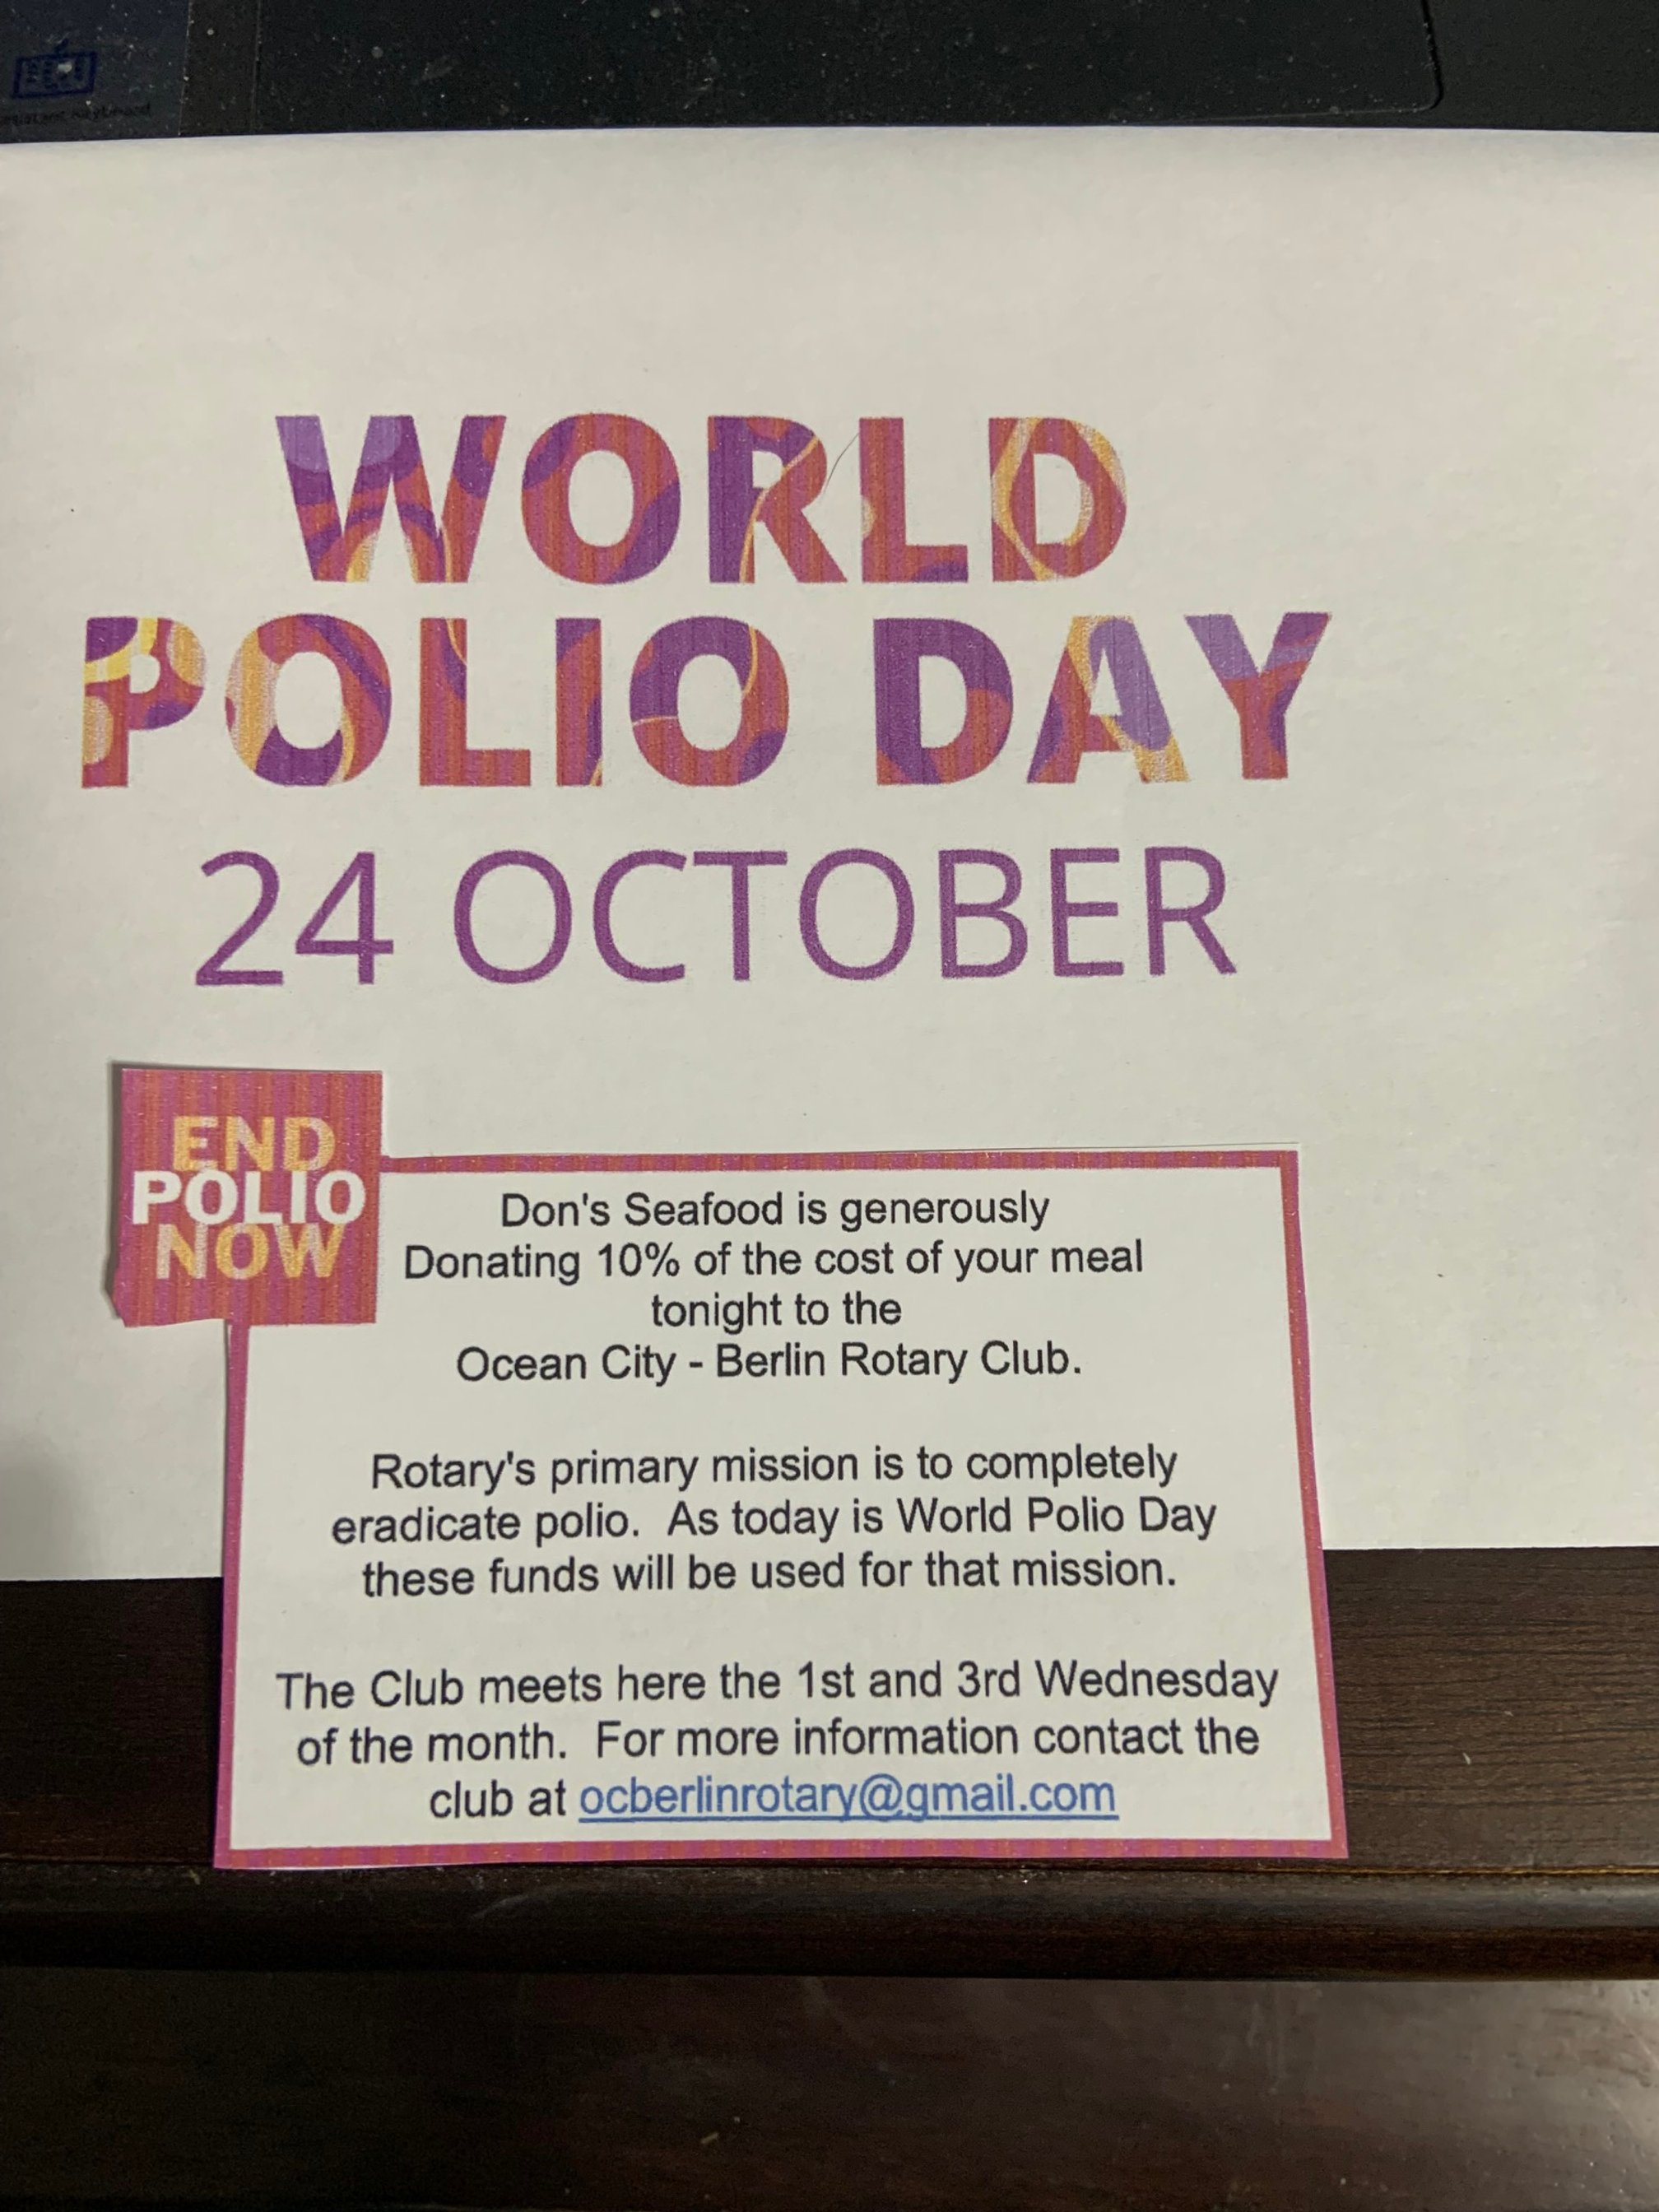  World Polio Day, October 24th 